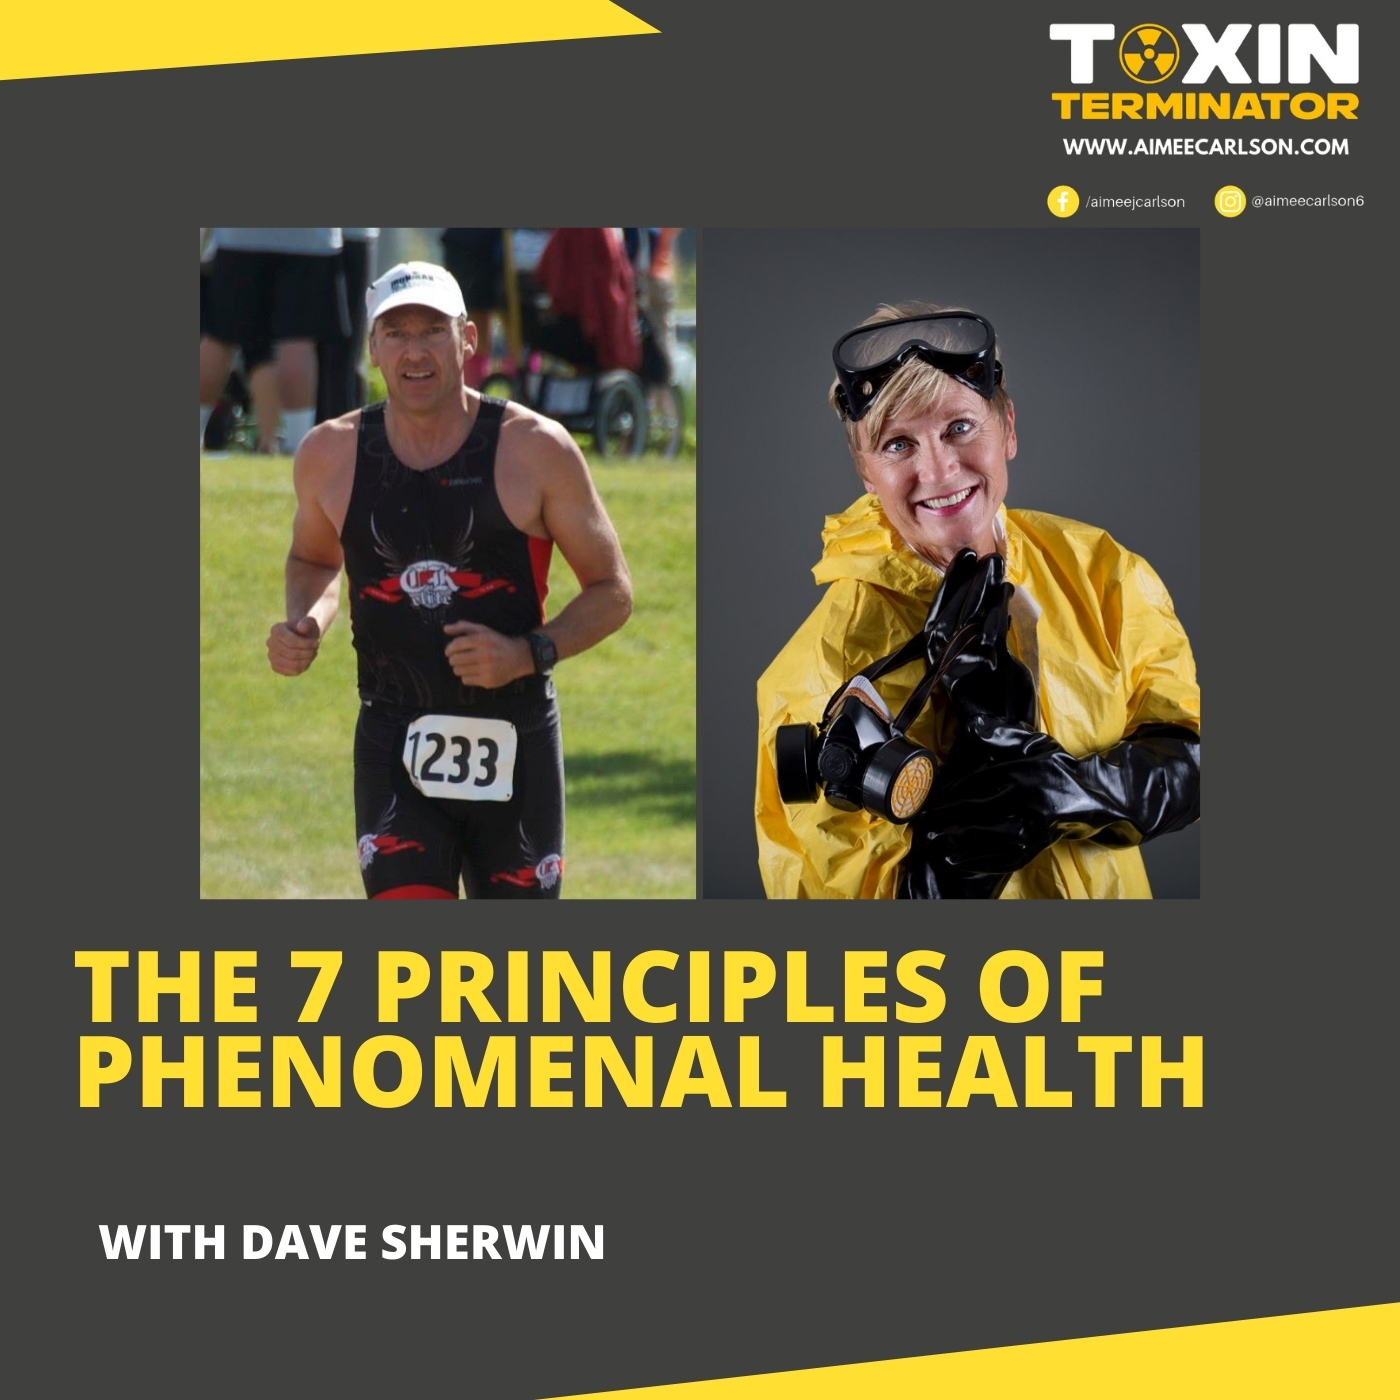 The 7 Principles of Phenomenal Health with Dave Sherwin